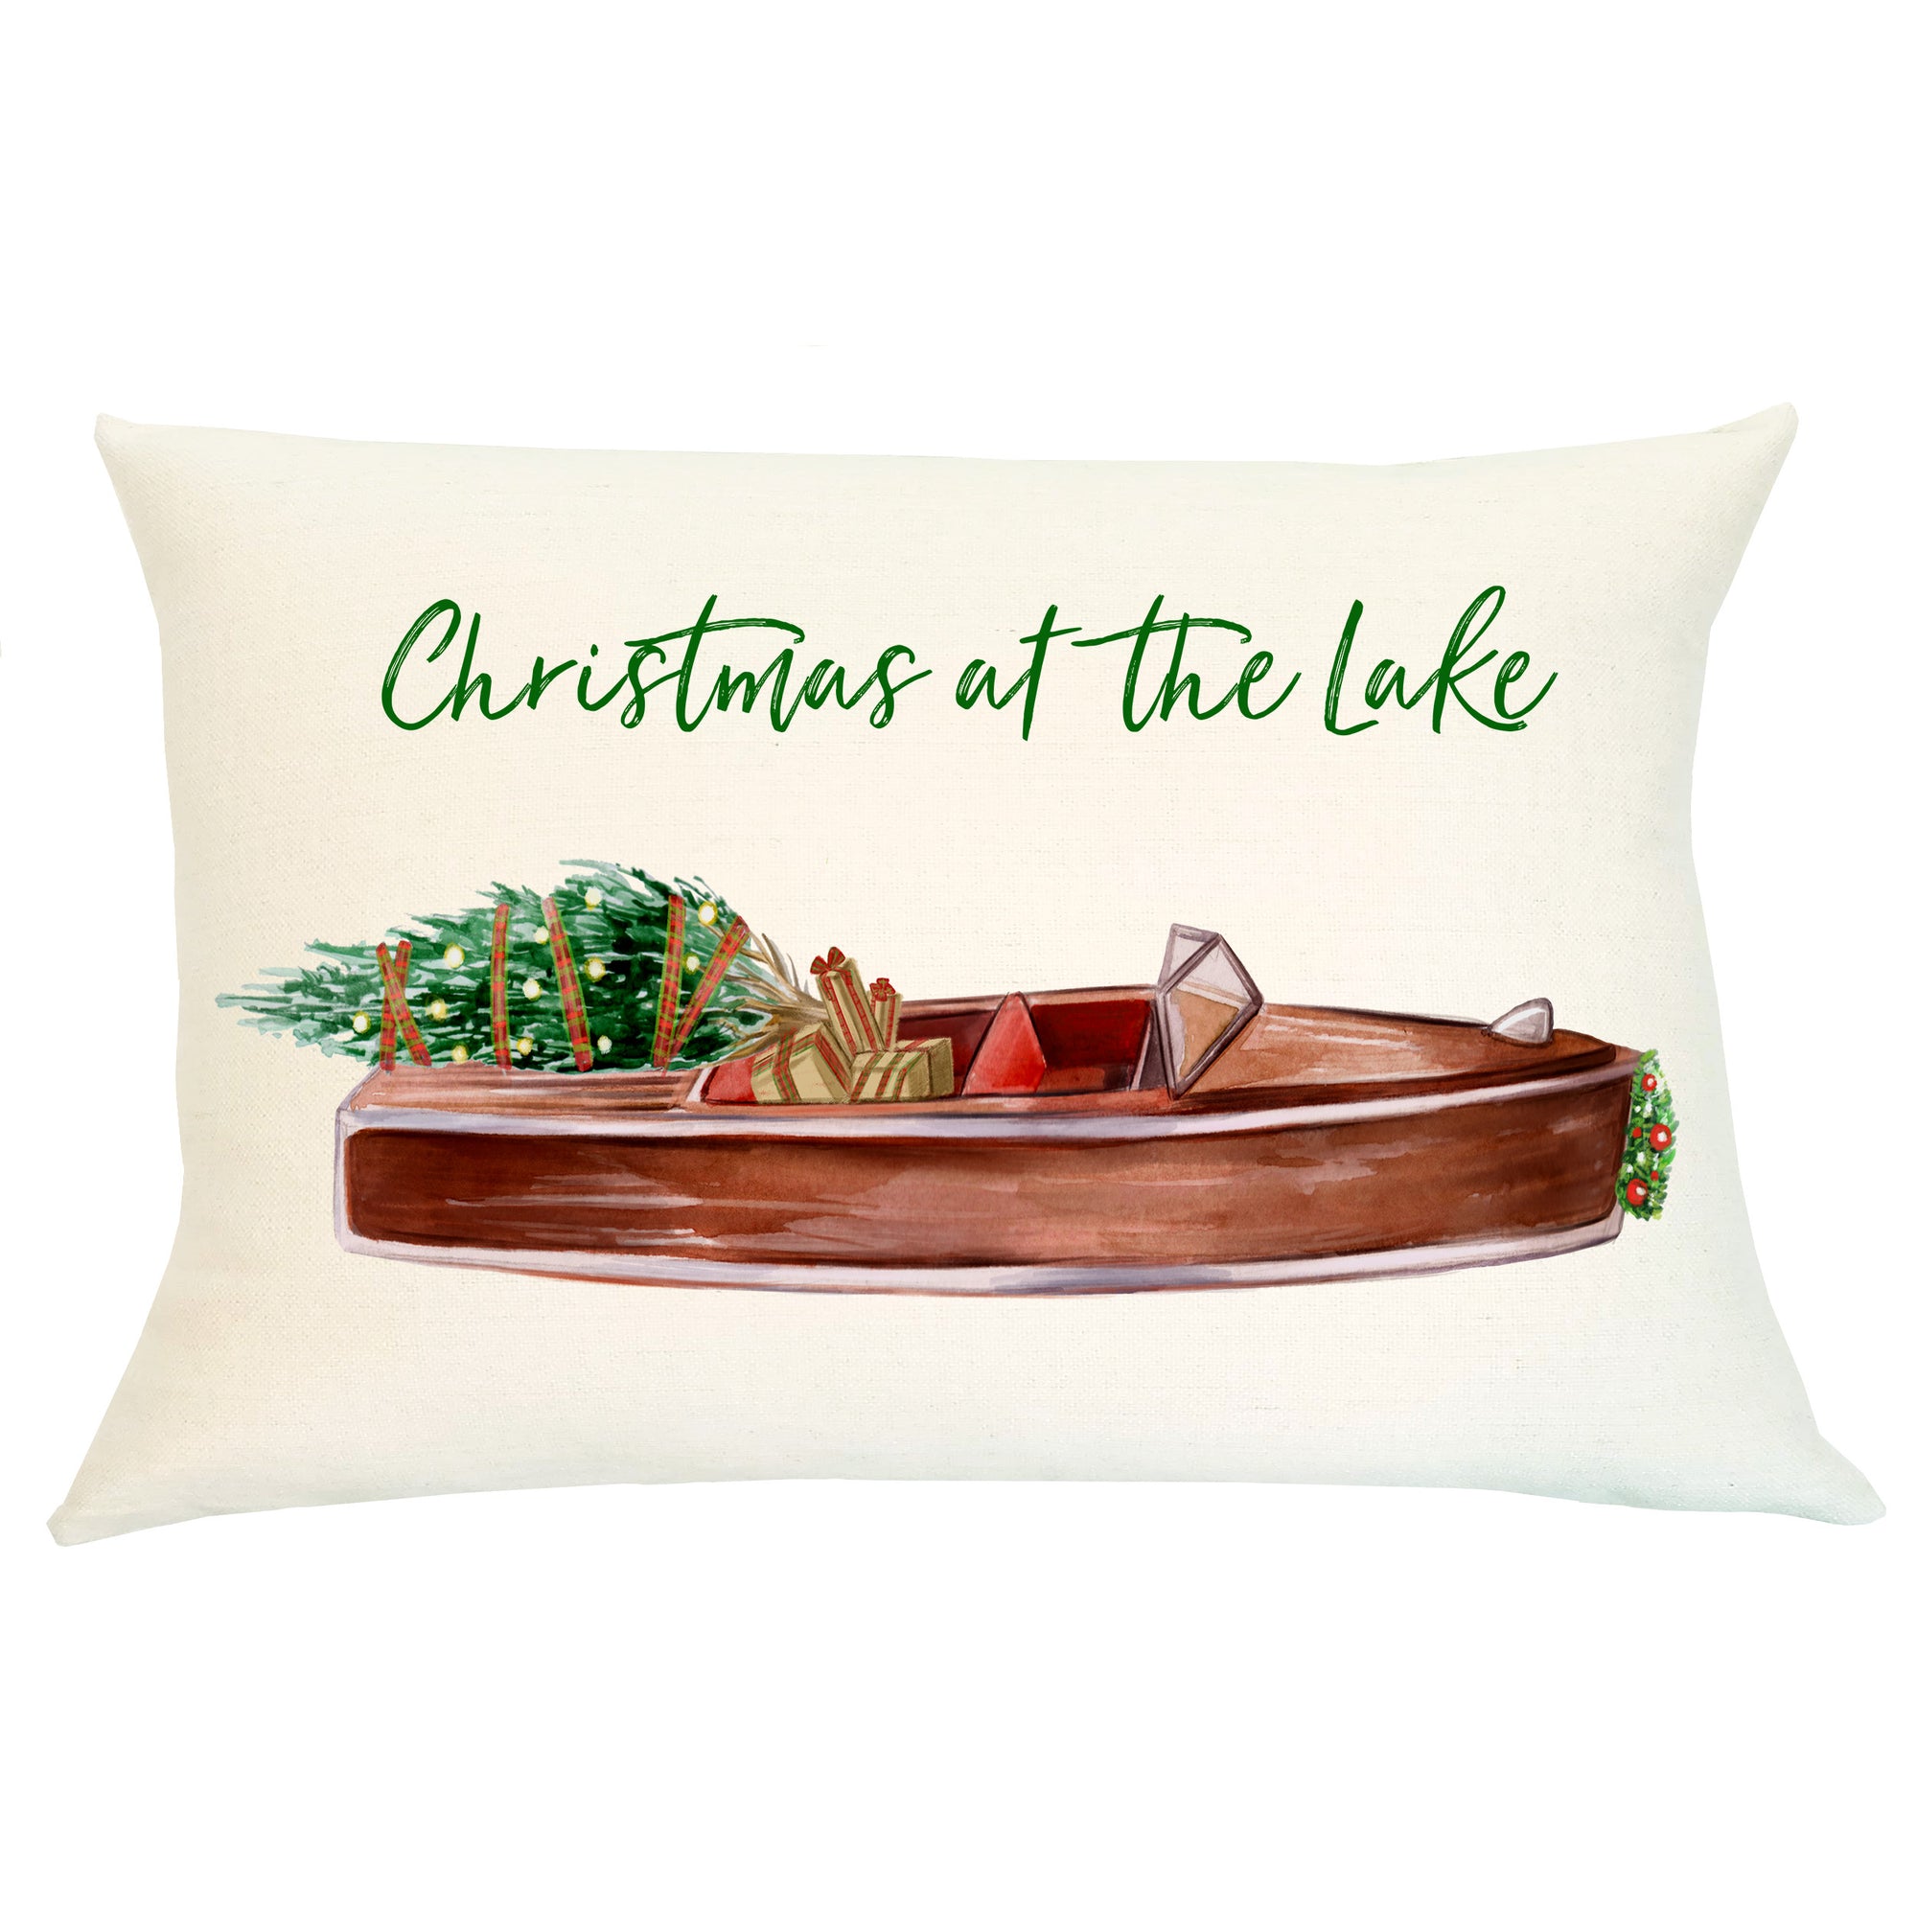 Pillow Lumbar - Christmas at the Lake - Insert Included - South Austin Lane